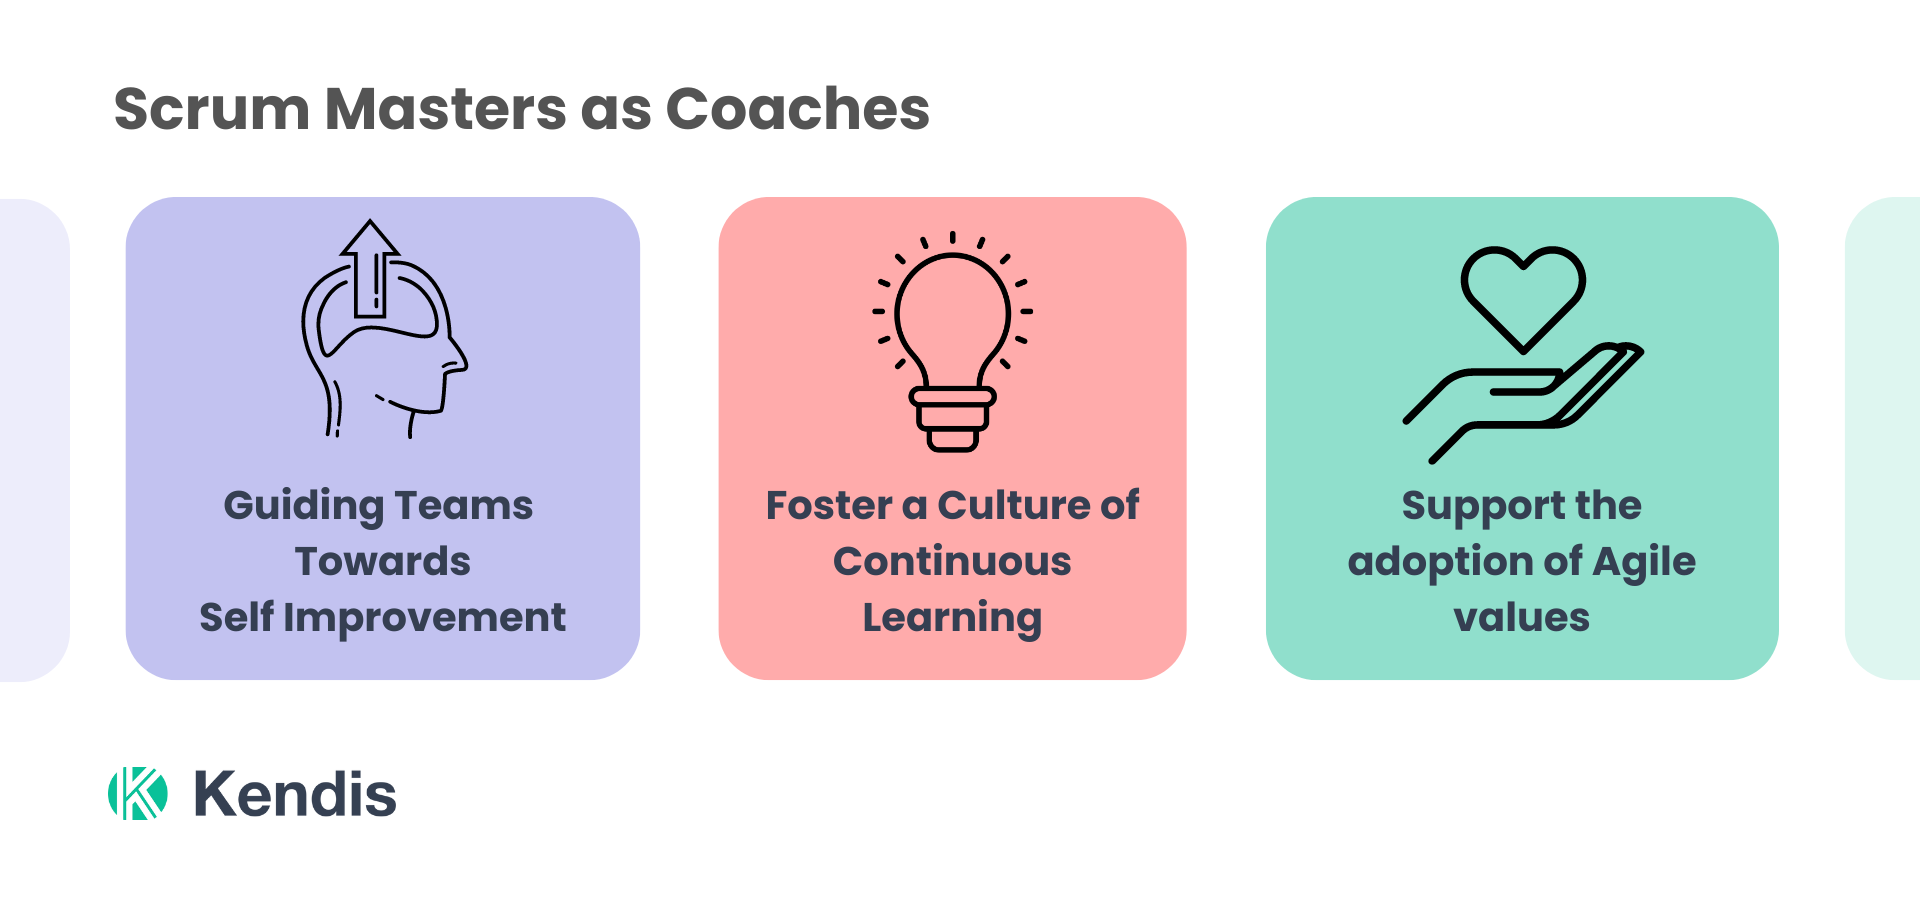 Role of a Scrum Master as a Coach in the Scaled Agile Framework